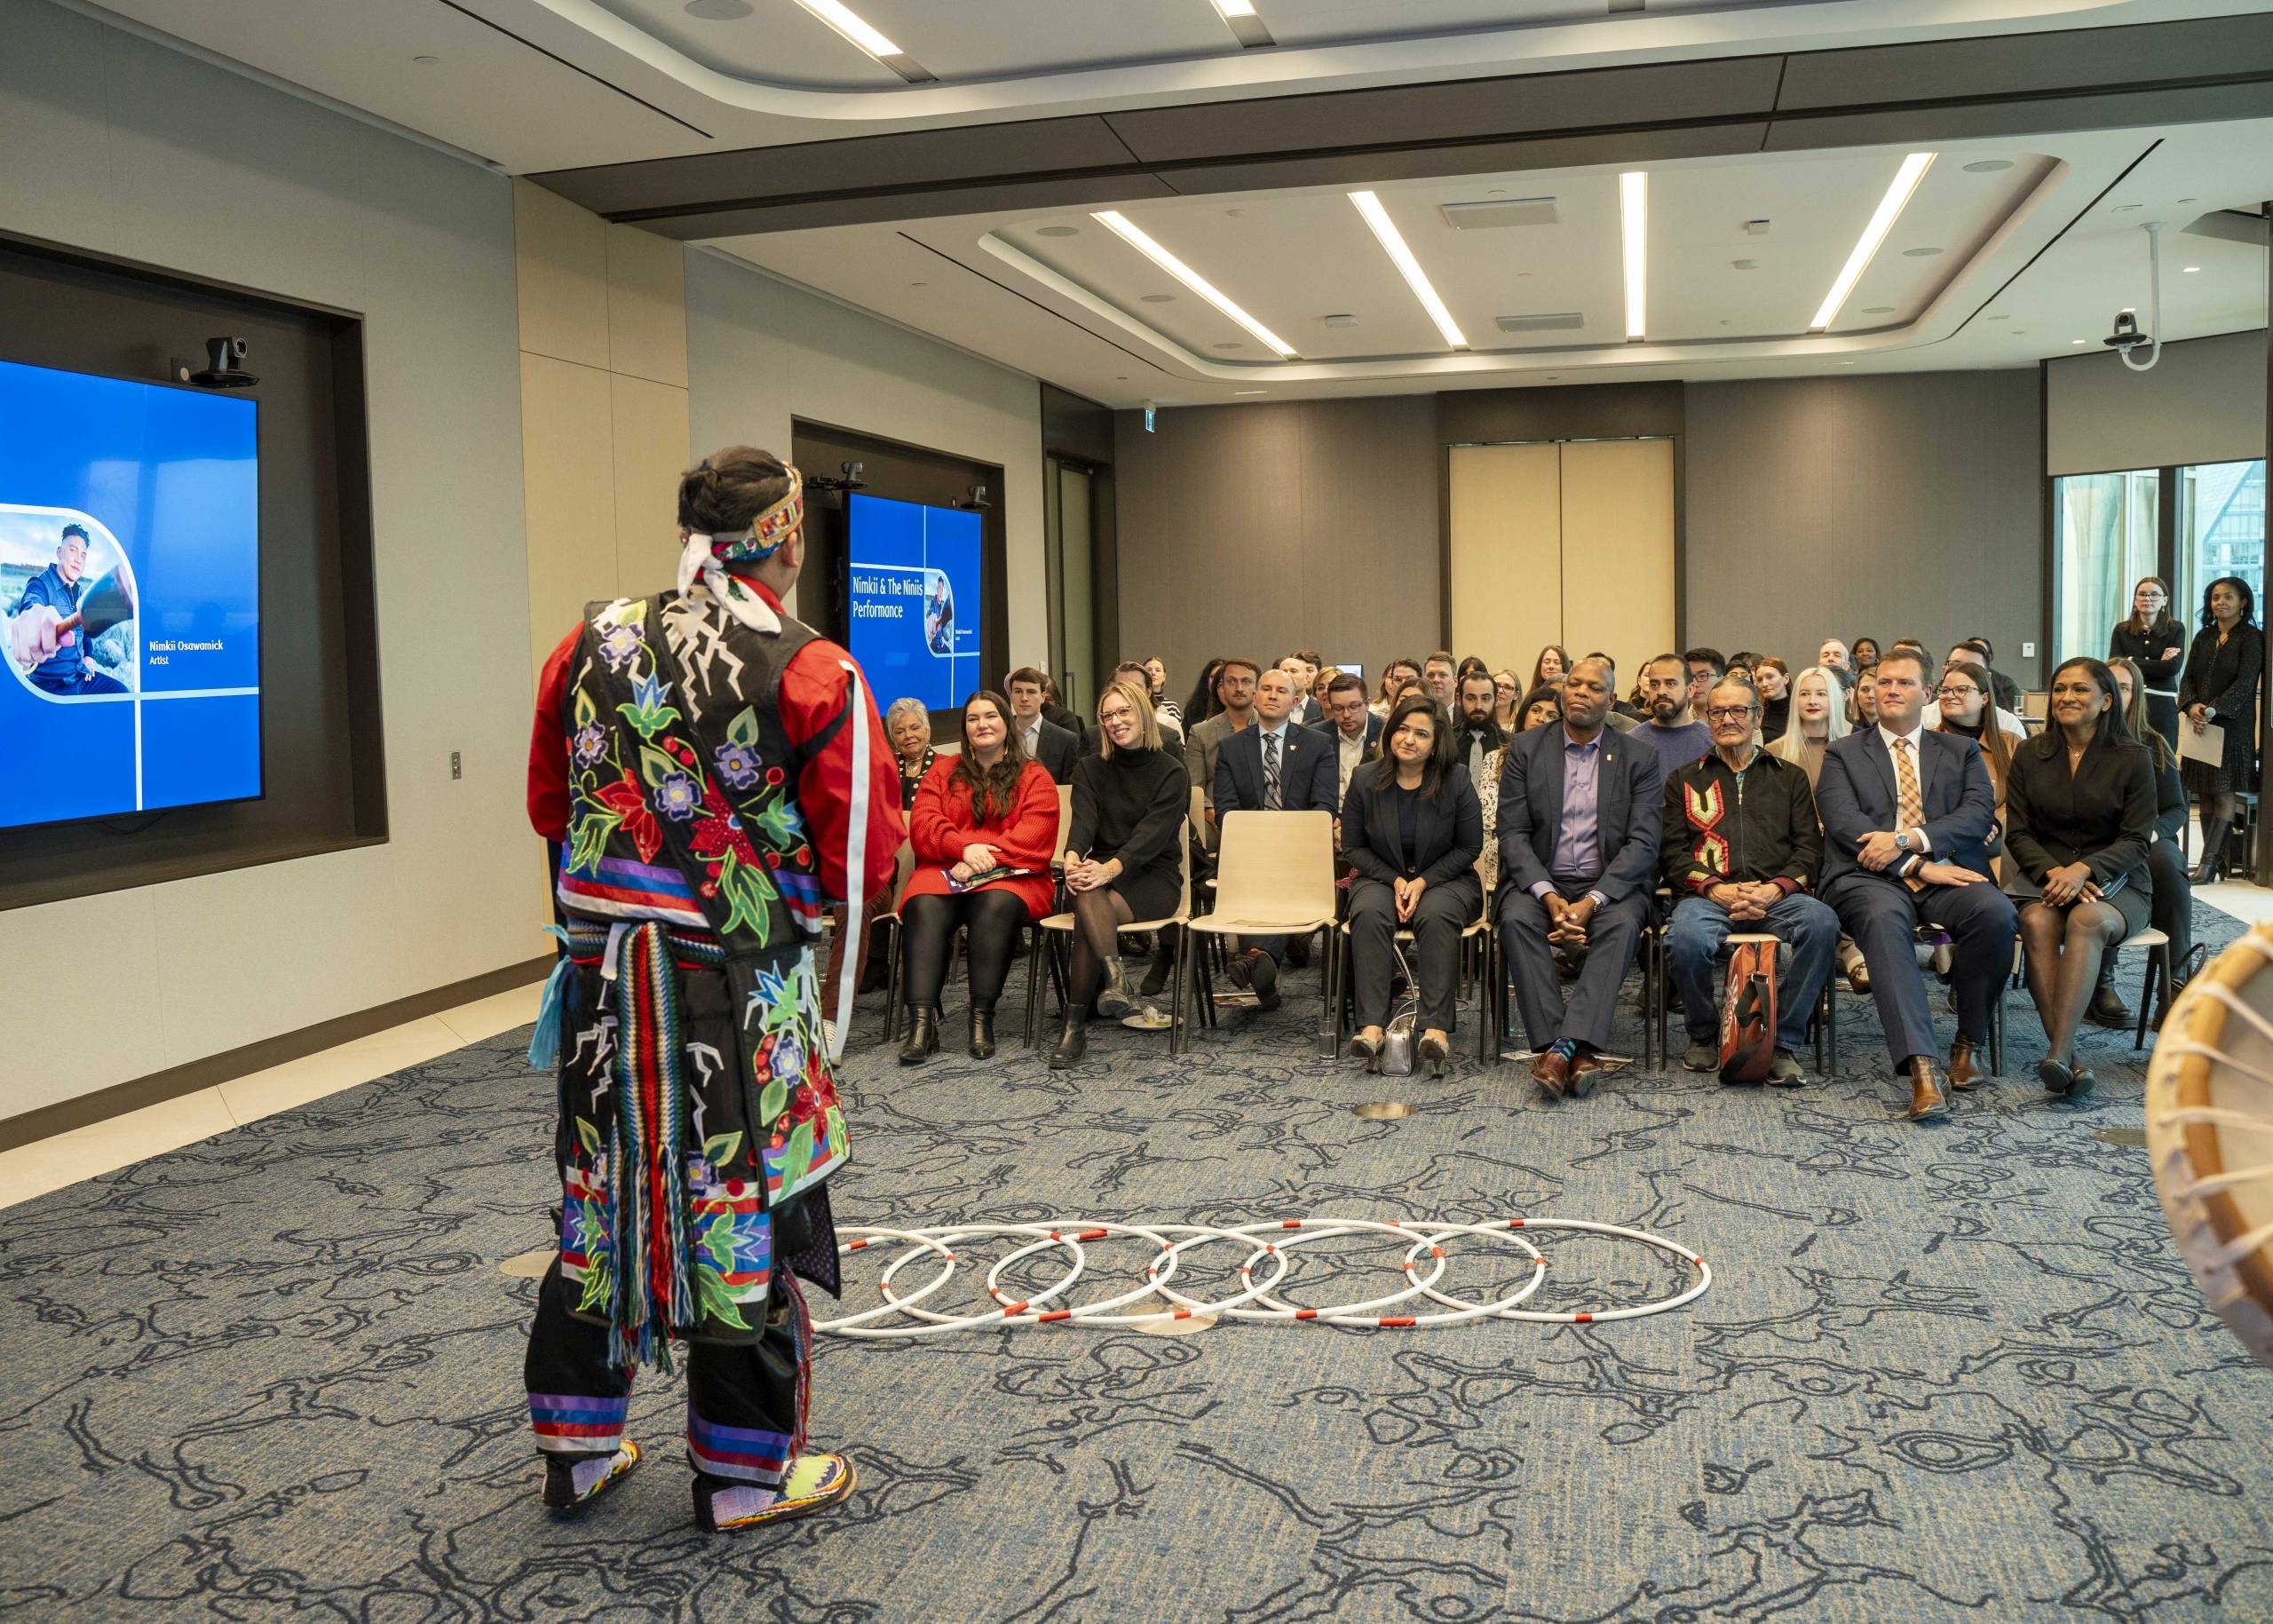 RBC’s Legacy Space includes a number of Indigenous elements